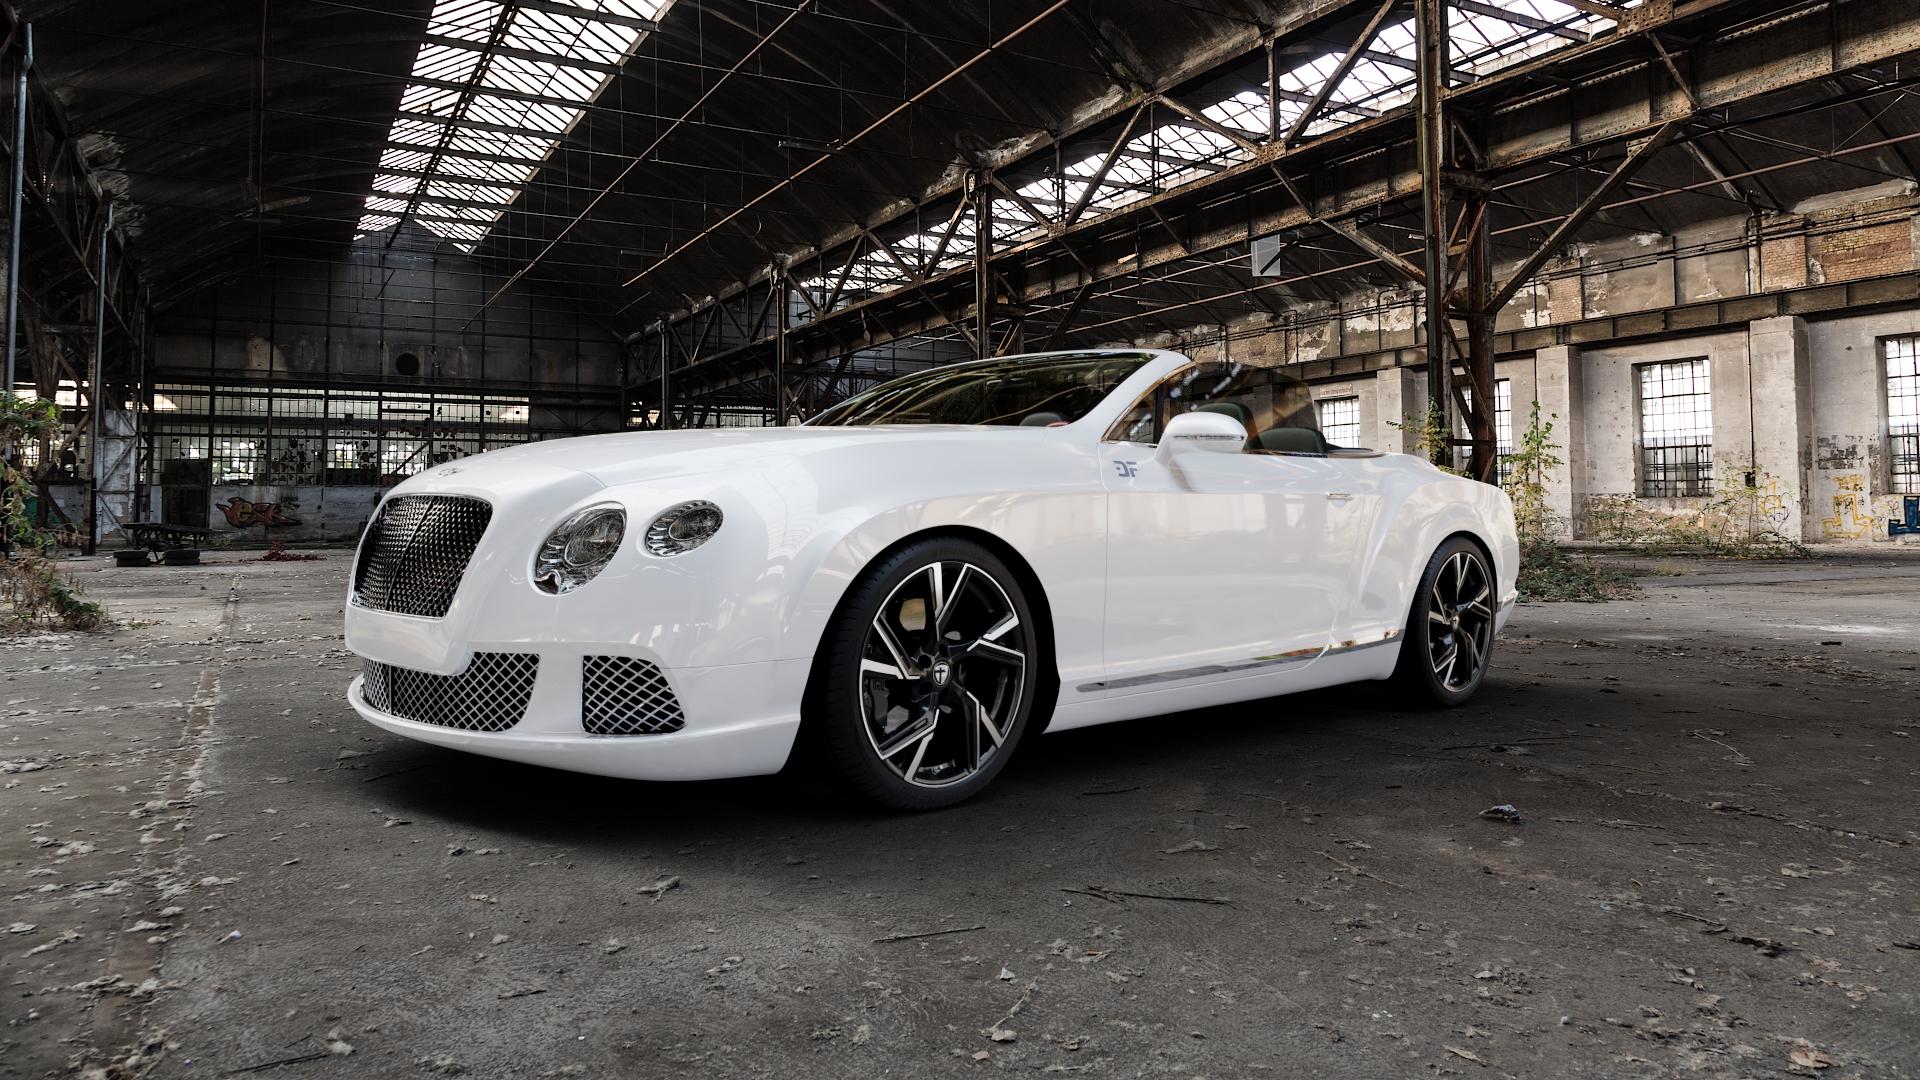 Bentley Continental GT Type 3W 6,0l 412kW (560 hp) Wheels and Tyre Packages